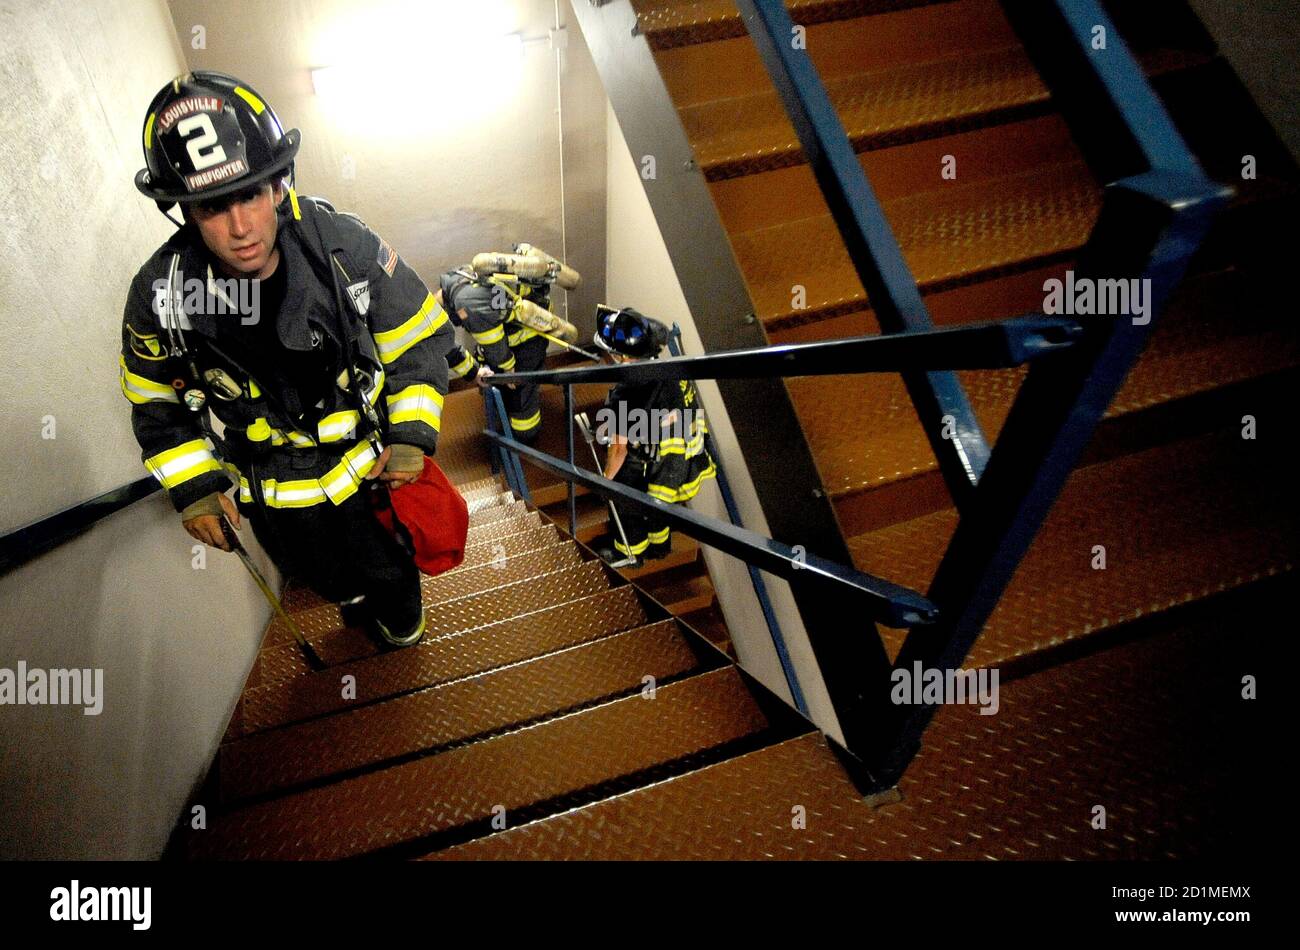 Eric Williams, with the Louisville Fire Department, trudges up the stairs for the 9/11 Memorial Stair Climb at the Qwest Building in Denver, Colorado September 11, 2009. Some 343 firefighters from five states climbed the 55 stories of the Qwest building twice for a total of 110 stories in remembrance of the firefighters killed in the World Trade Center attack September 11, 2001. REUTERS/Mark Leffingwell (UNITED STATES POLITICS ANNIVERSARY) Stock Photo